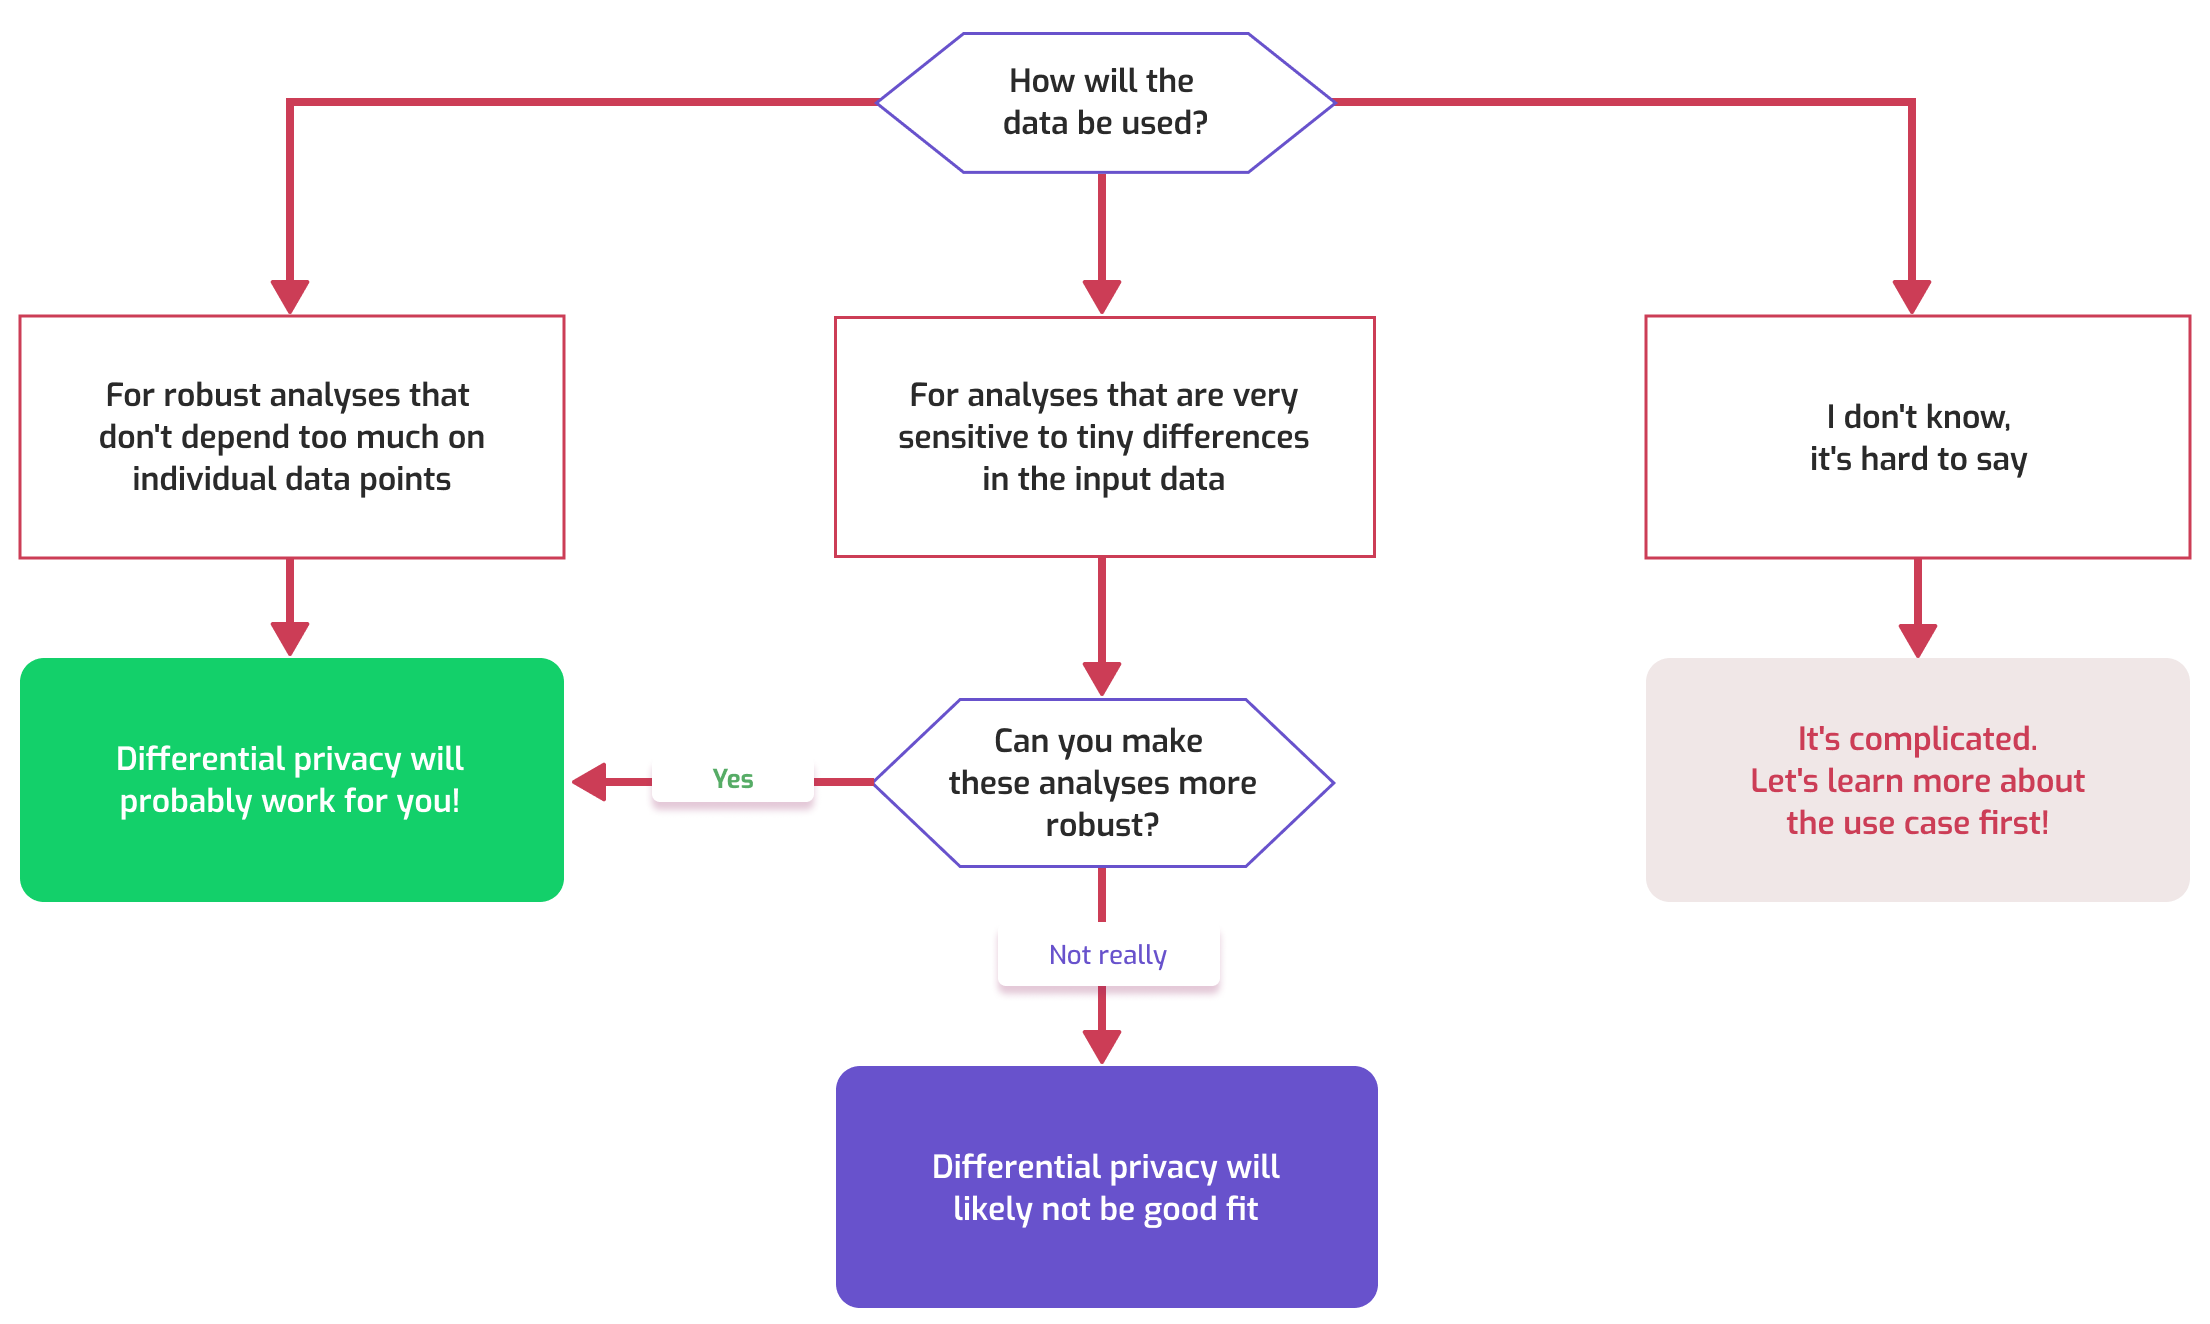 A flowchart representing the litmus test described in the article. It starts
with a question: "How will the data be used?". There are three options.
"I don't know, it's hard to say" leads to "It's complicated. Let's learn more
about the use case first!". "For robust analyses that don't depend too much on
individual data points" leads to "Differential privacy will probably work for
you!". And "For analyses that are very sensitive to tiny differences in the
input data" leads to a second question: "Can you make these analyses more
robust?". If "Yes", then this goes to the same "DP will probably work" box as
earlier. If "Not really", this leads to "Differential privacy will likely not be
a good fit".